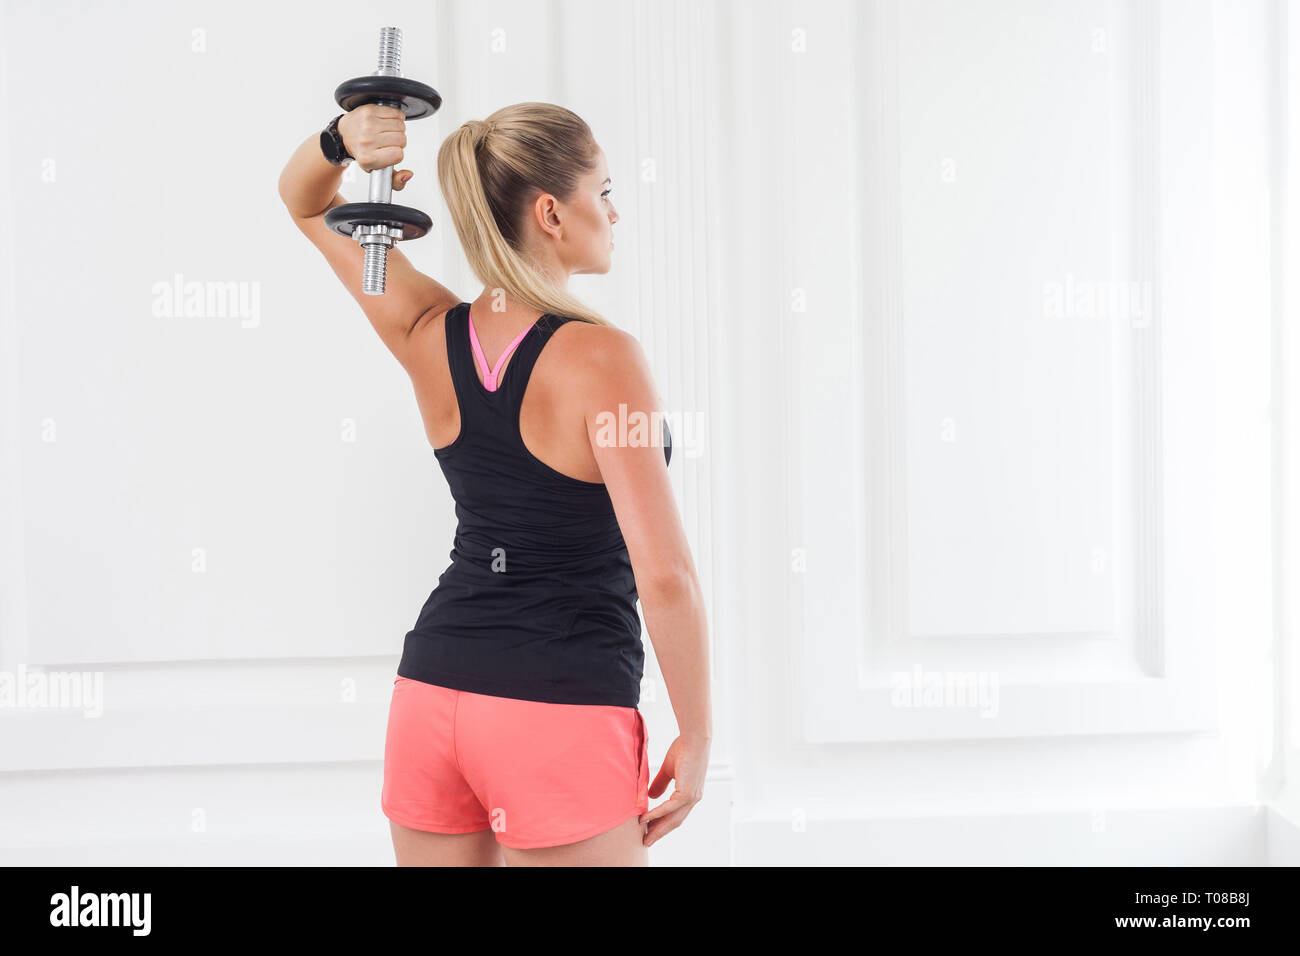 Striving for strong. Backside of young adult motivation athletic bodybuilder woman in pink shorts and black top standing, holding dumbells doing exerc Stock Photo